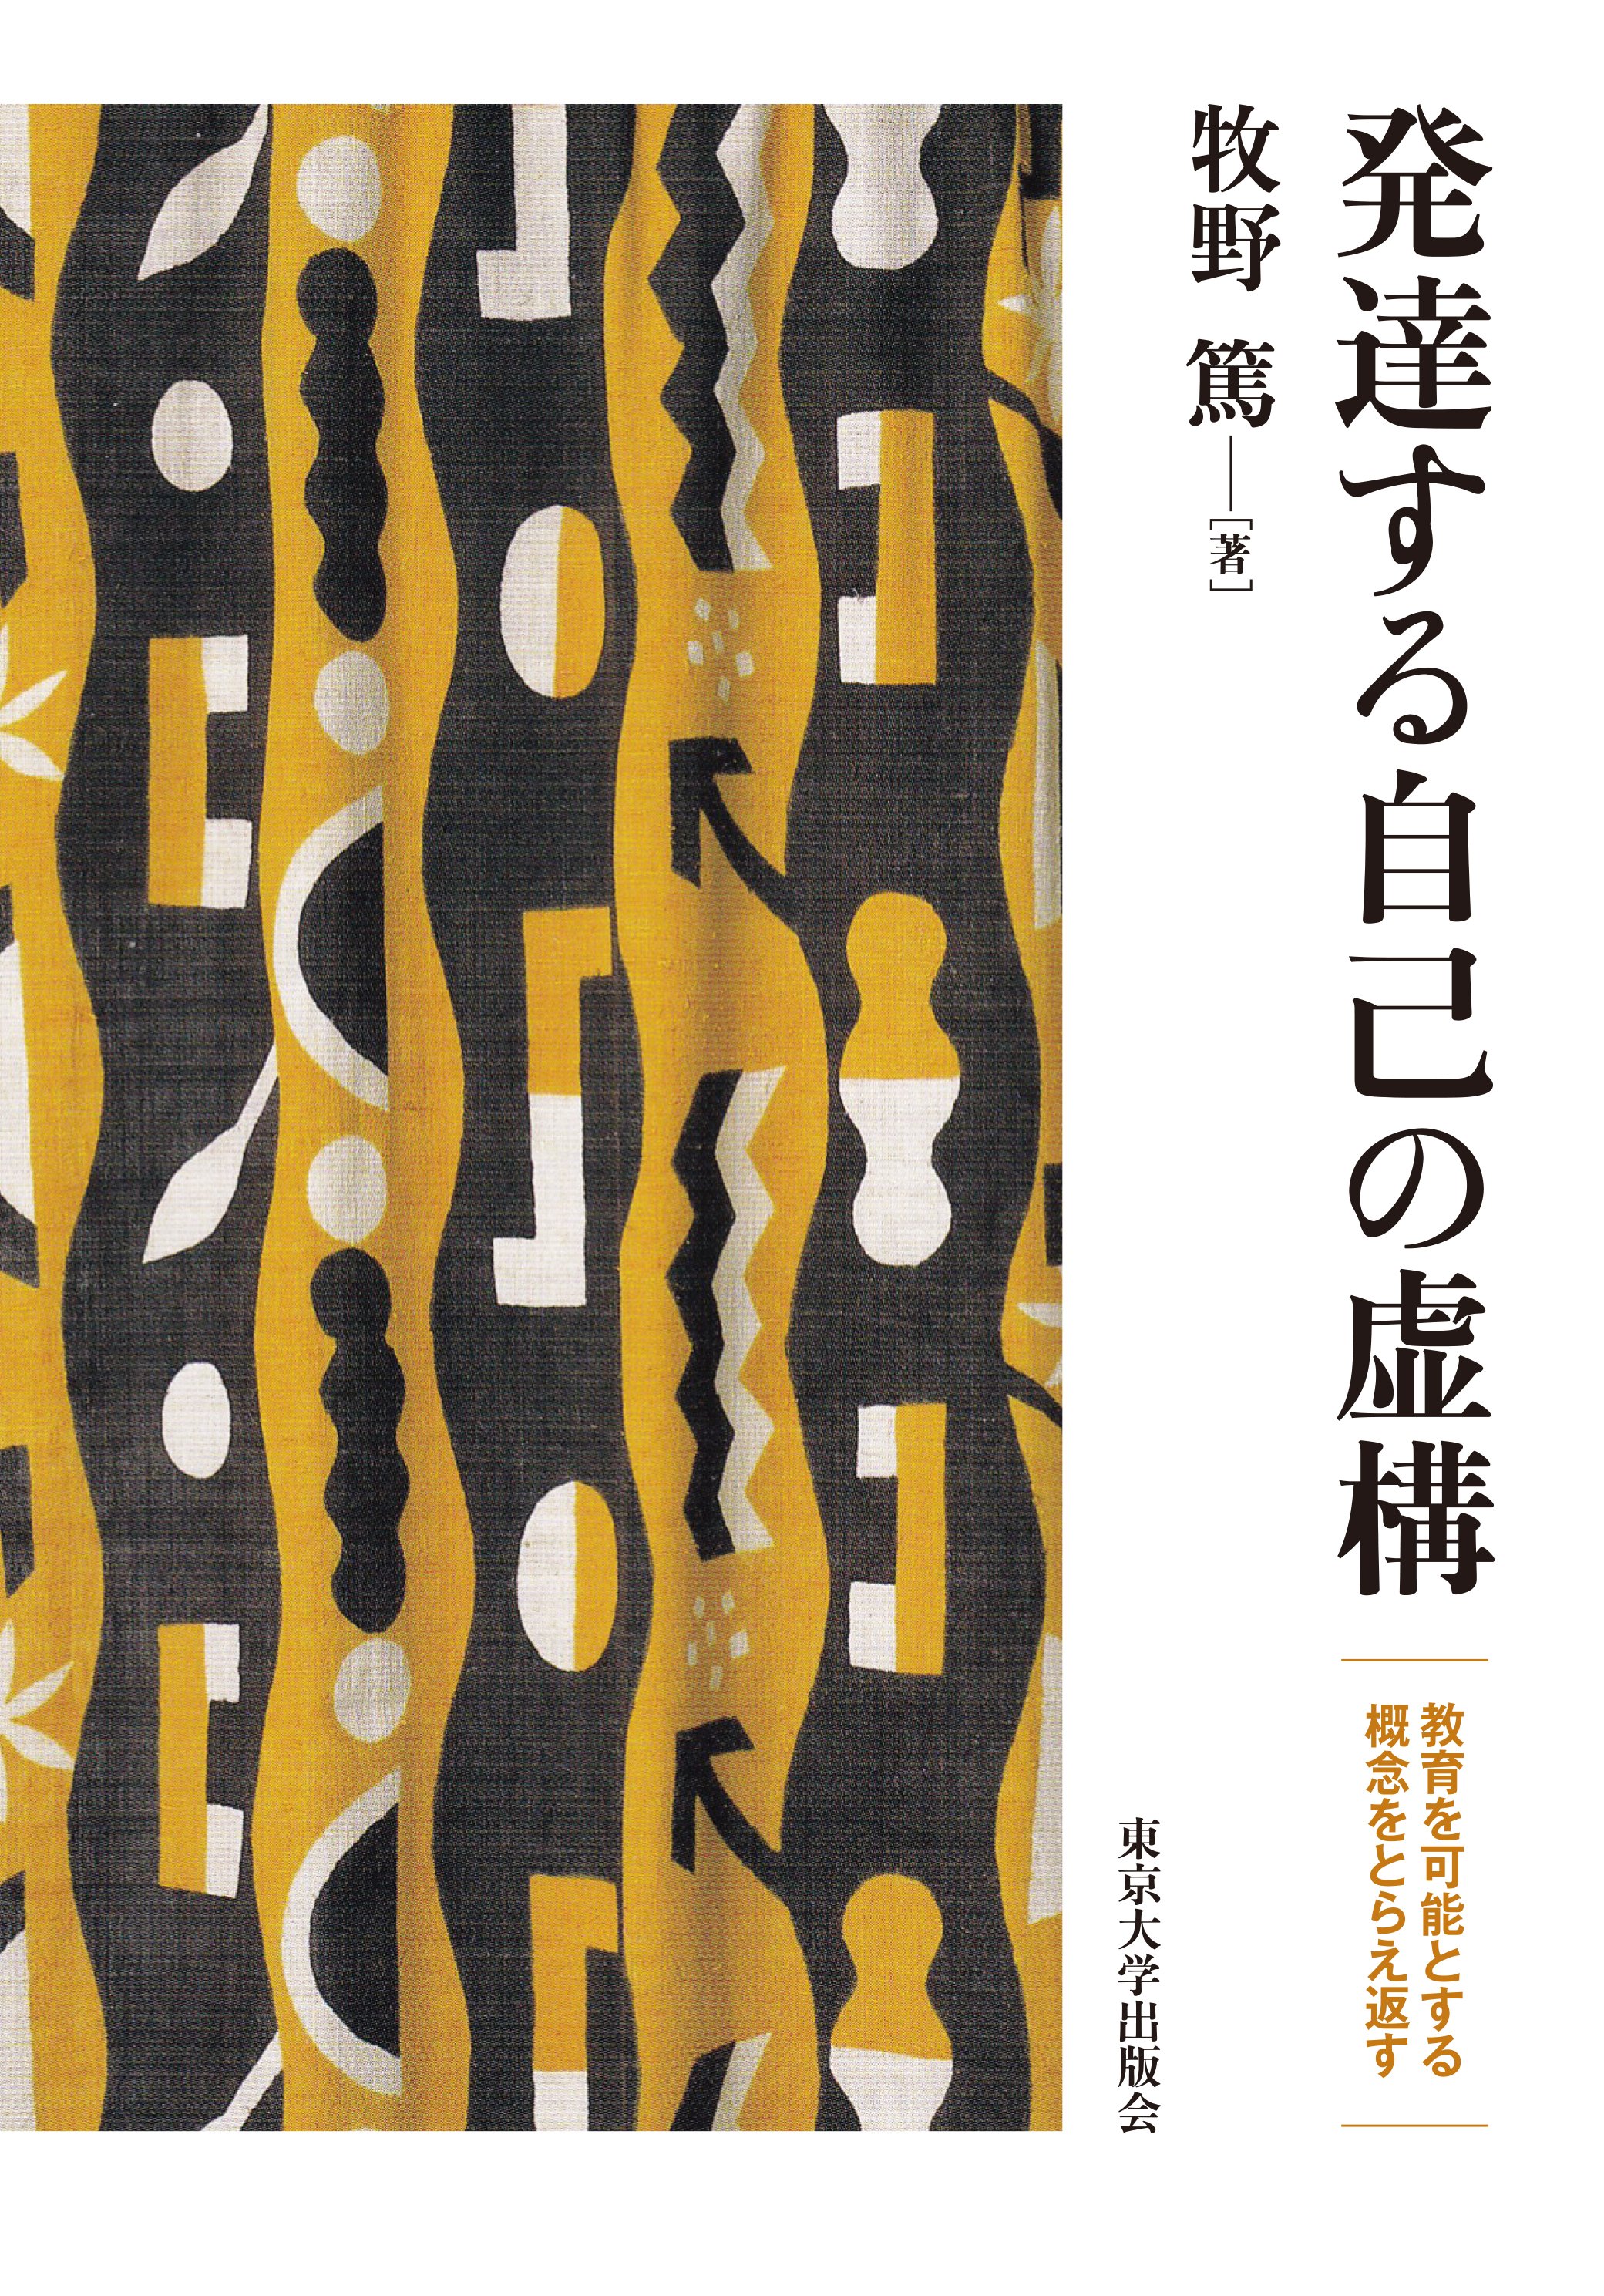 a picture of yellow and black fabric on the cover